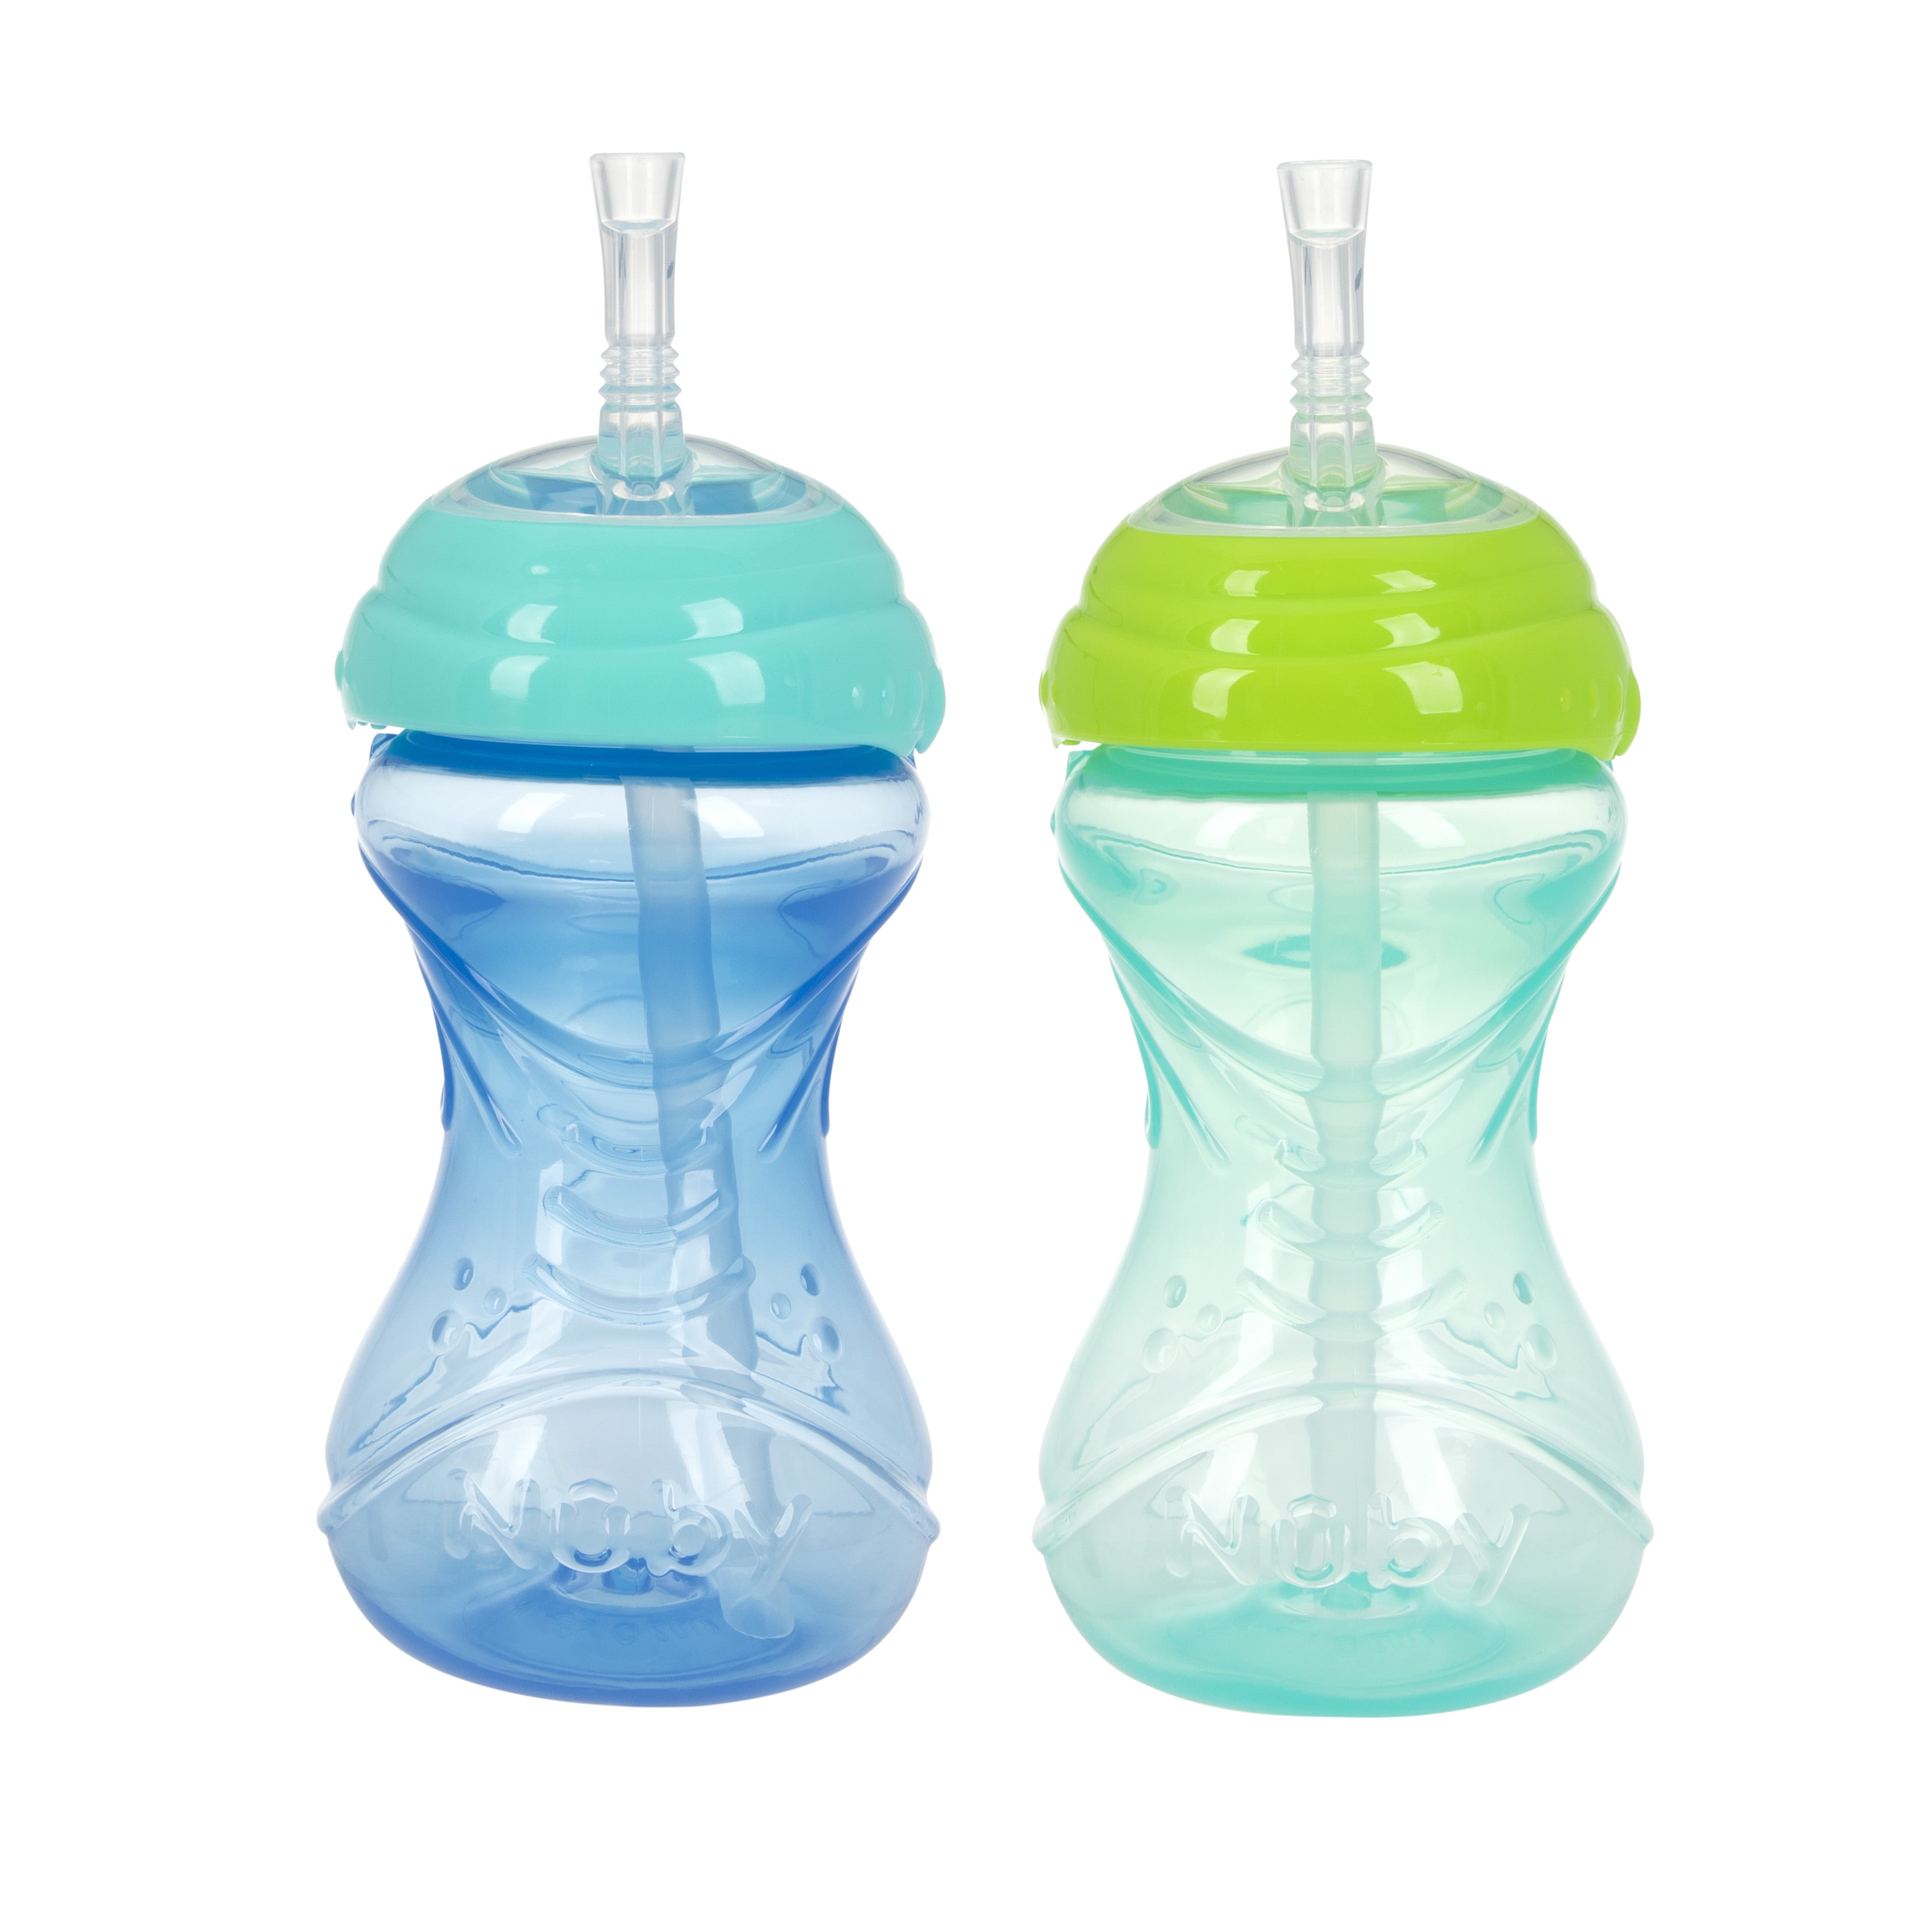 Re Play Made in USA 10 Oz. Sippy Cups for Toddlers, Pack of 4 - Reusable  Spill